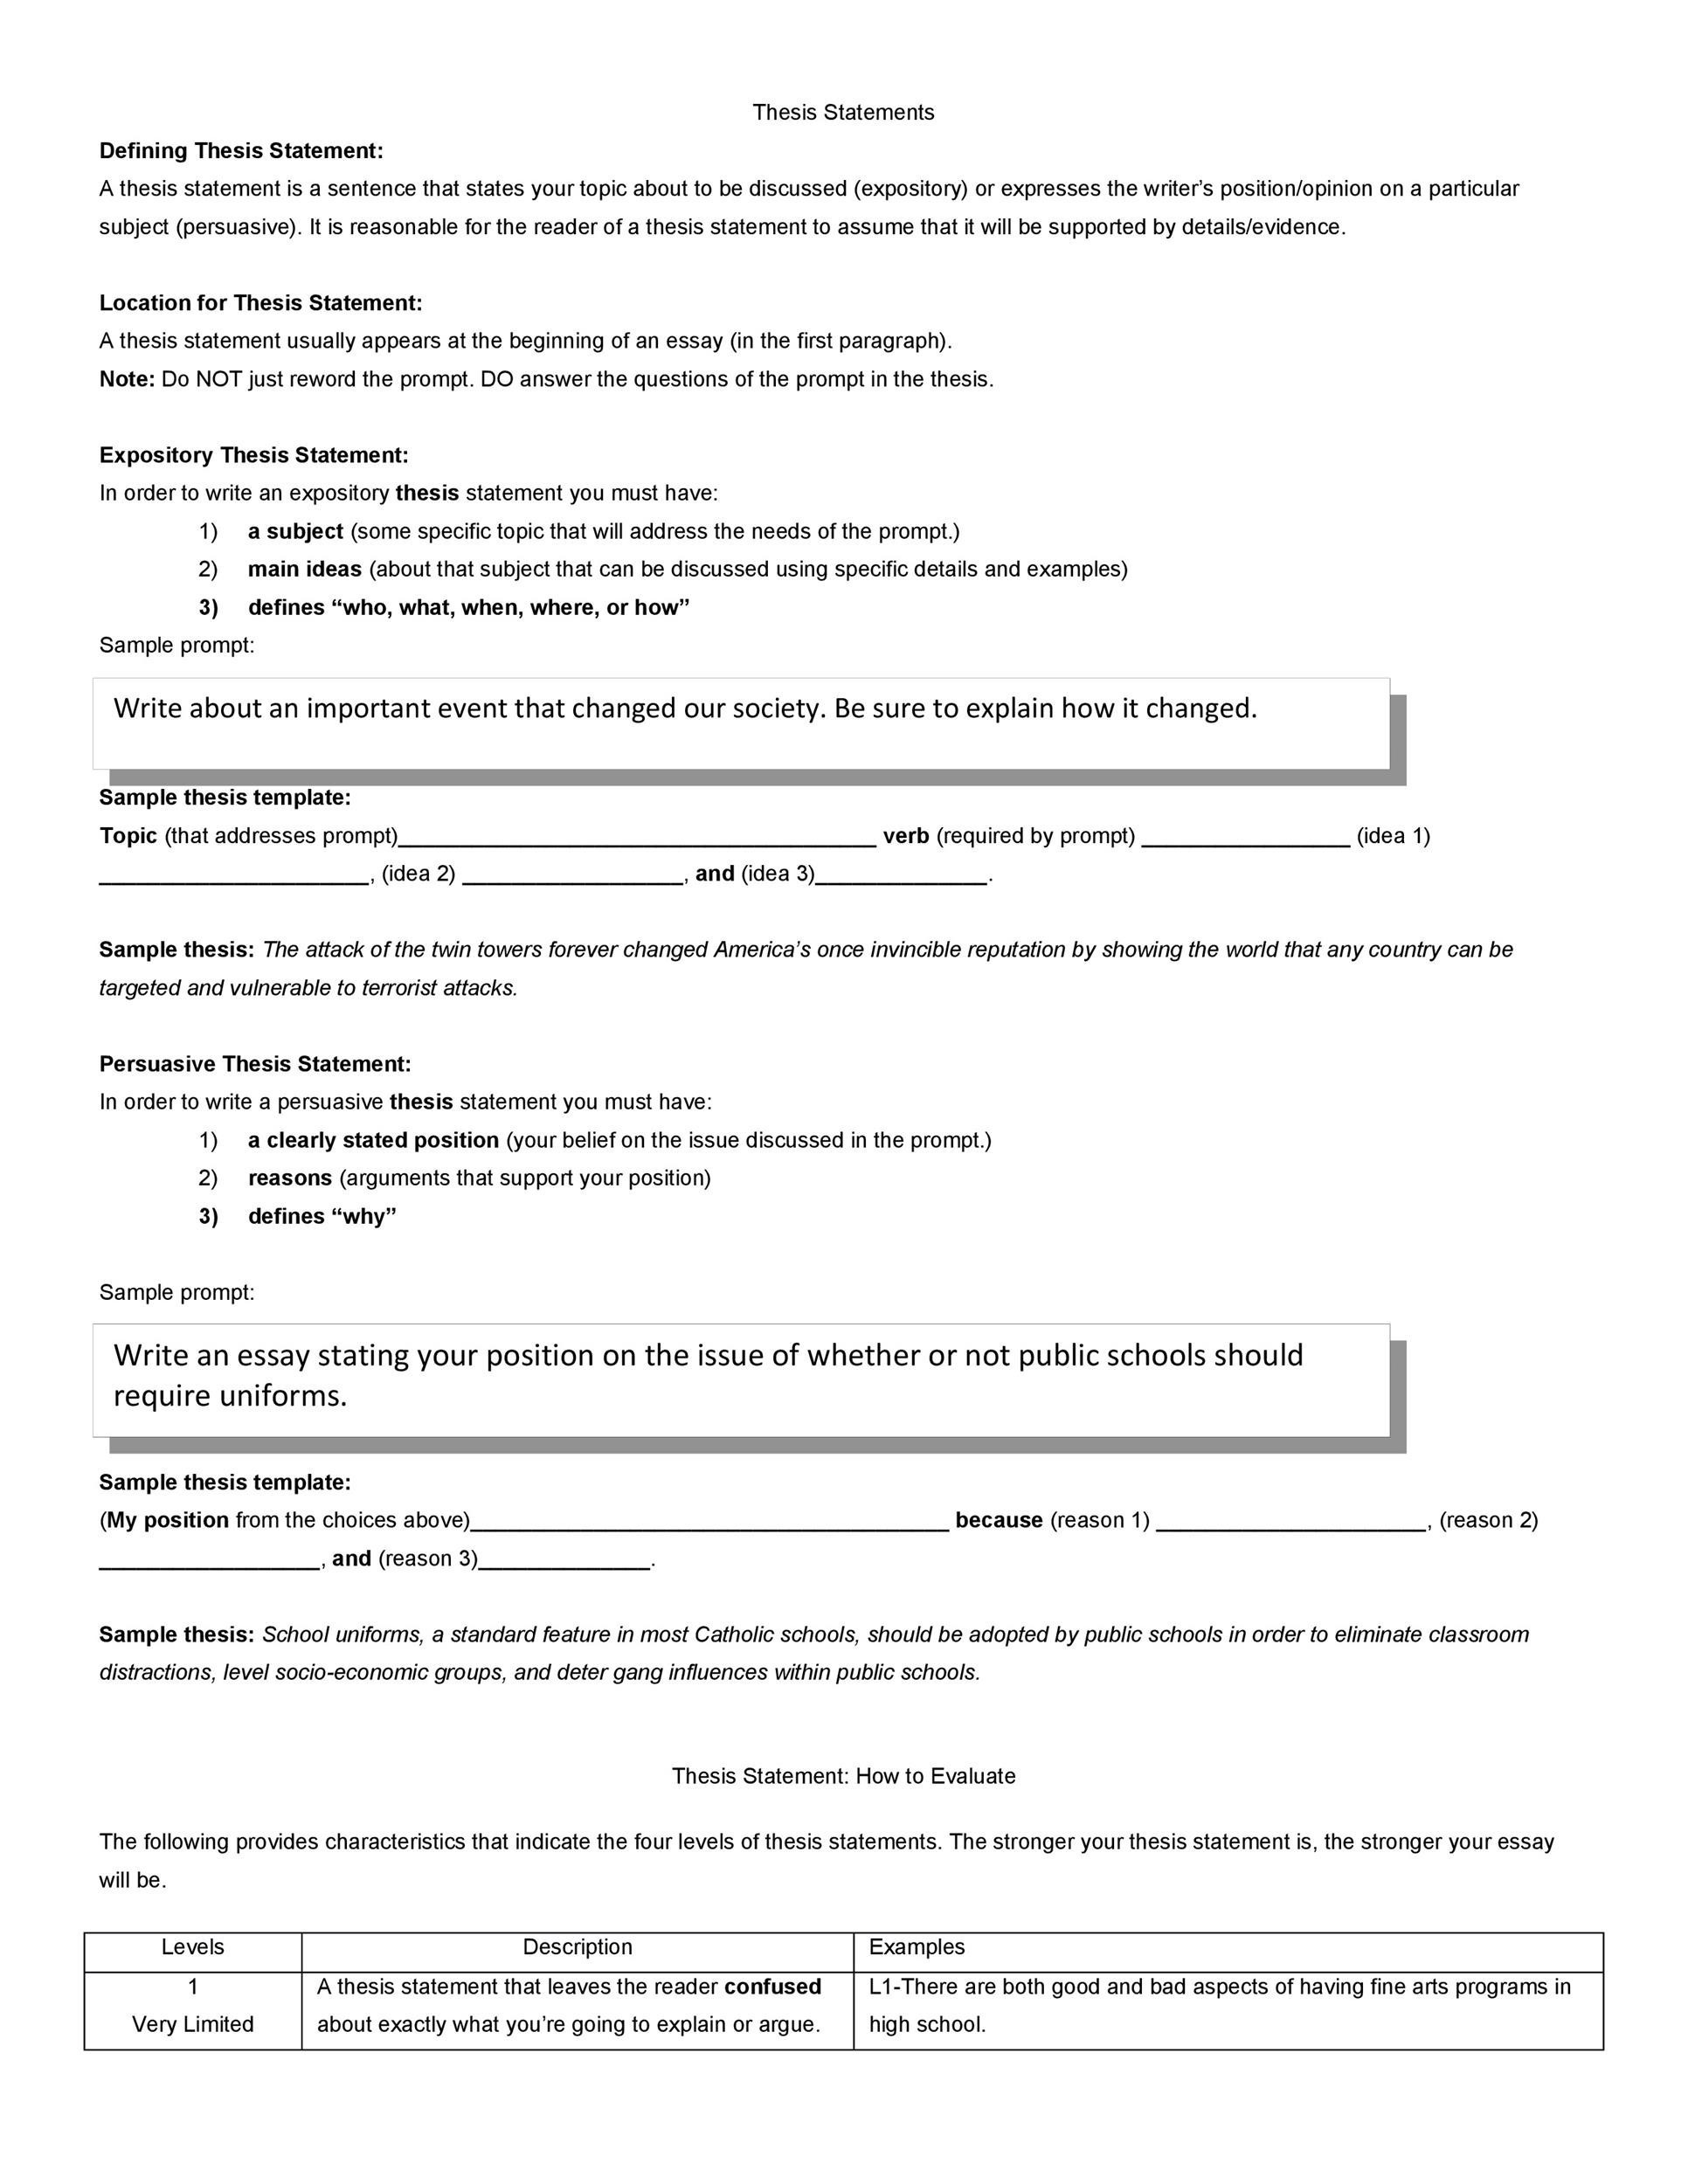 Free thesis statement template 31